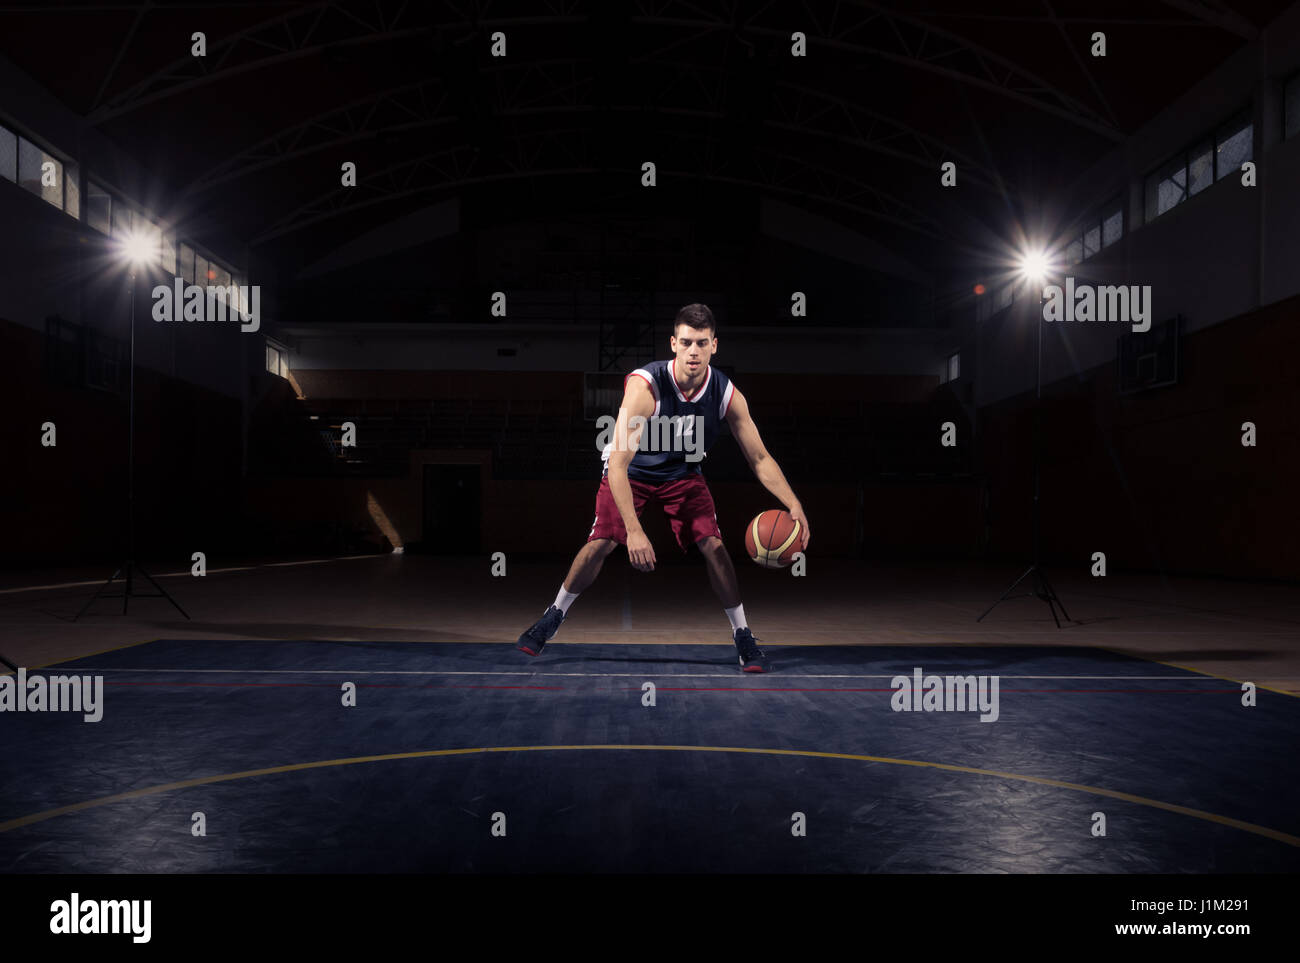 one young adult man, basketball player dribble ball, dark indoors basketball court Stock Photo